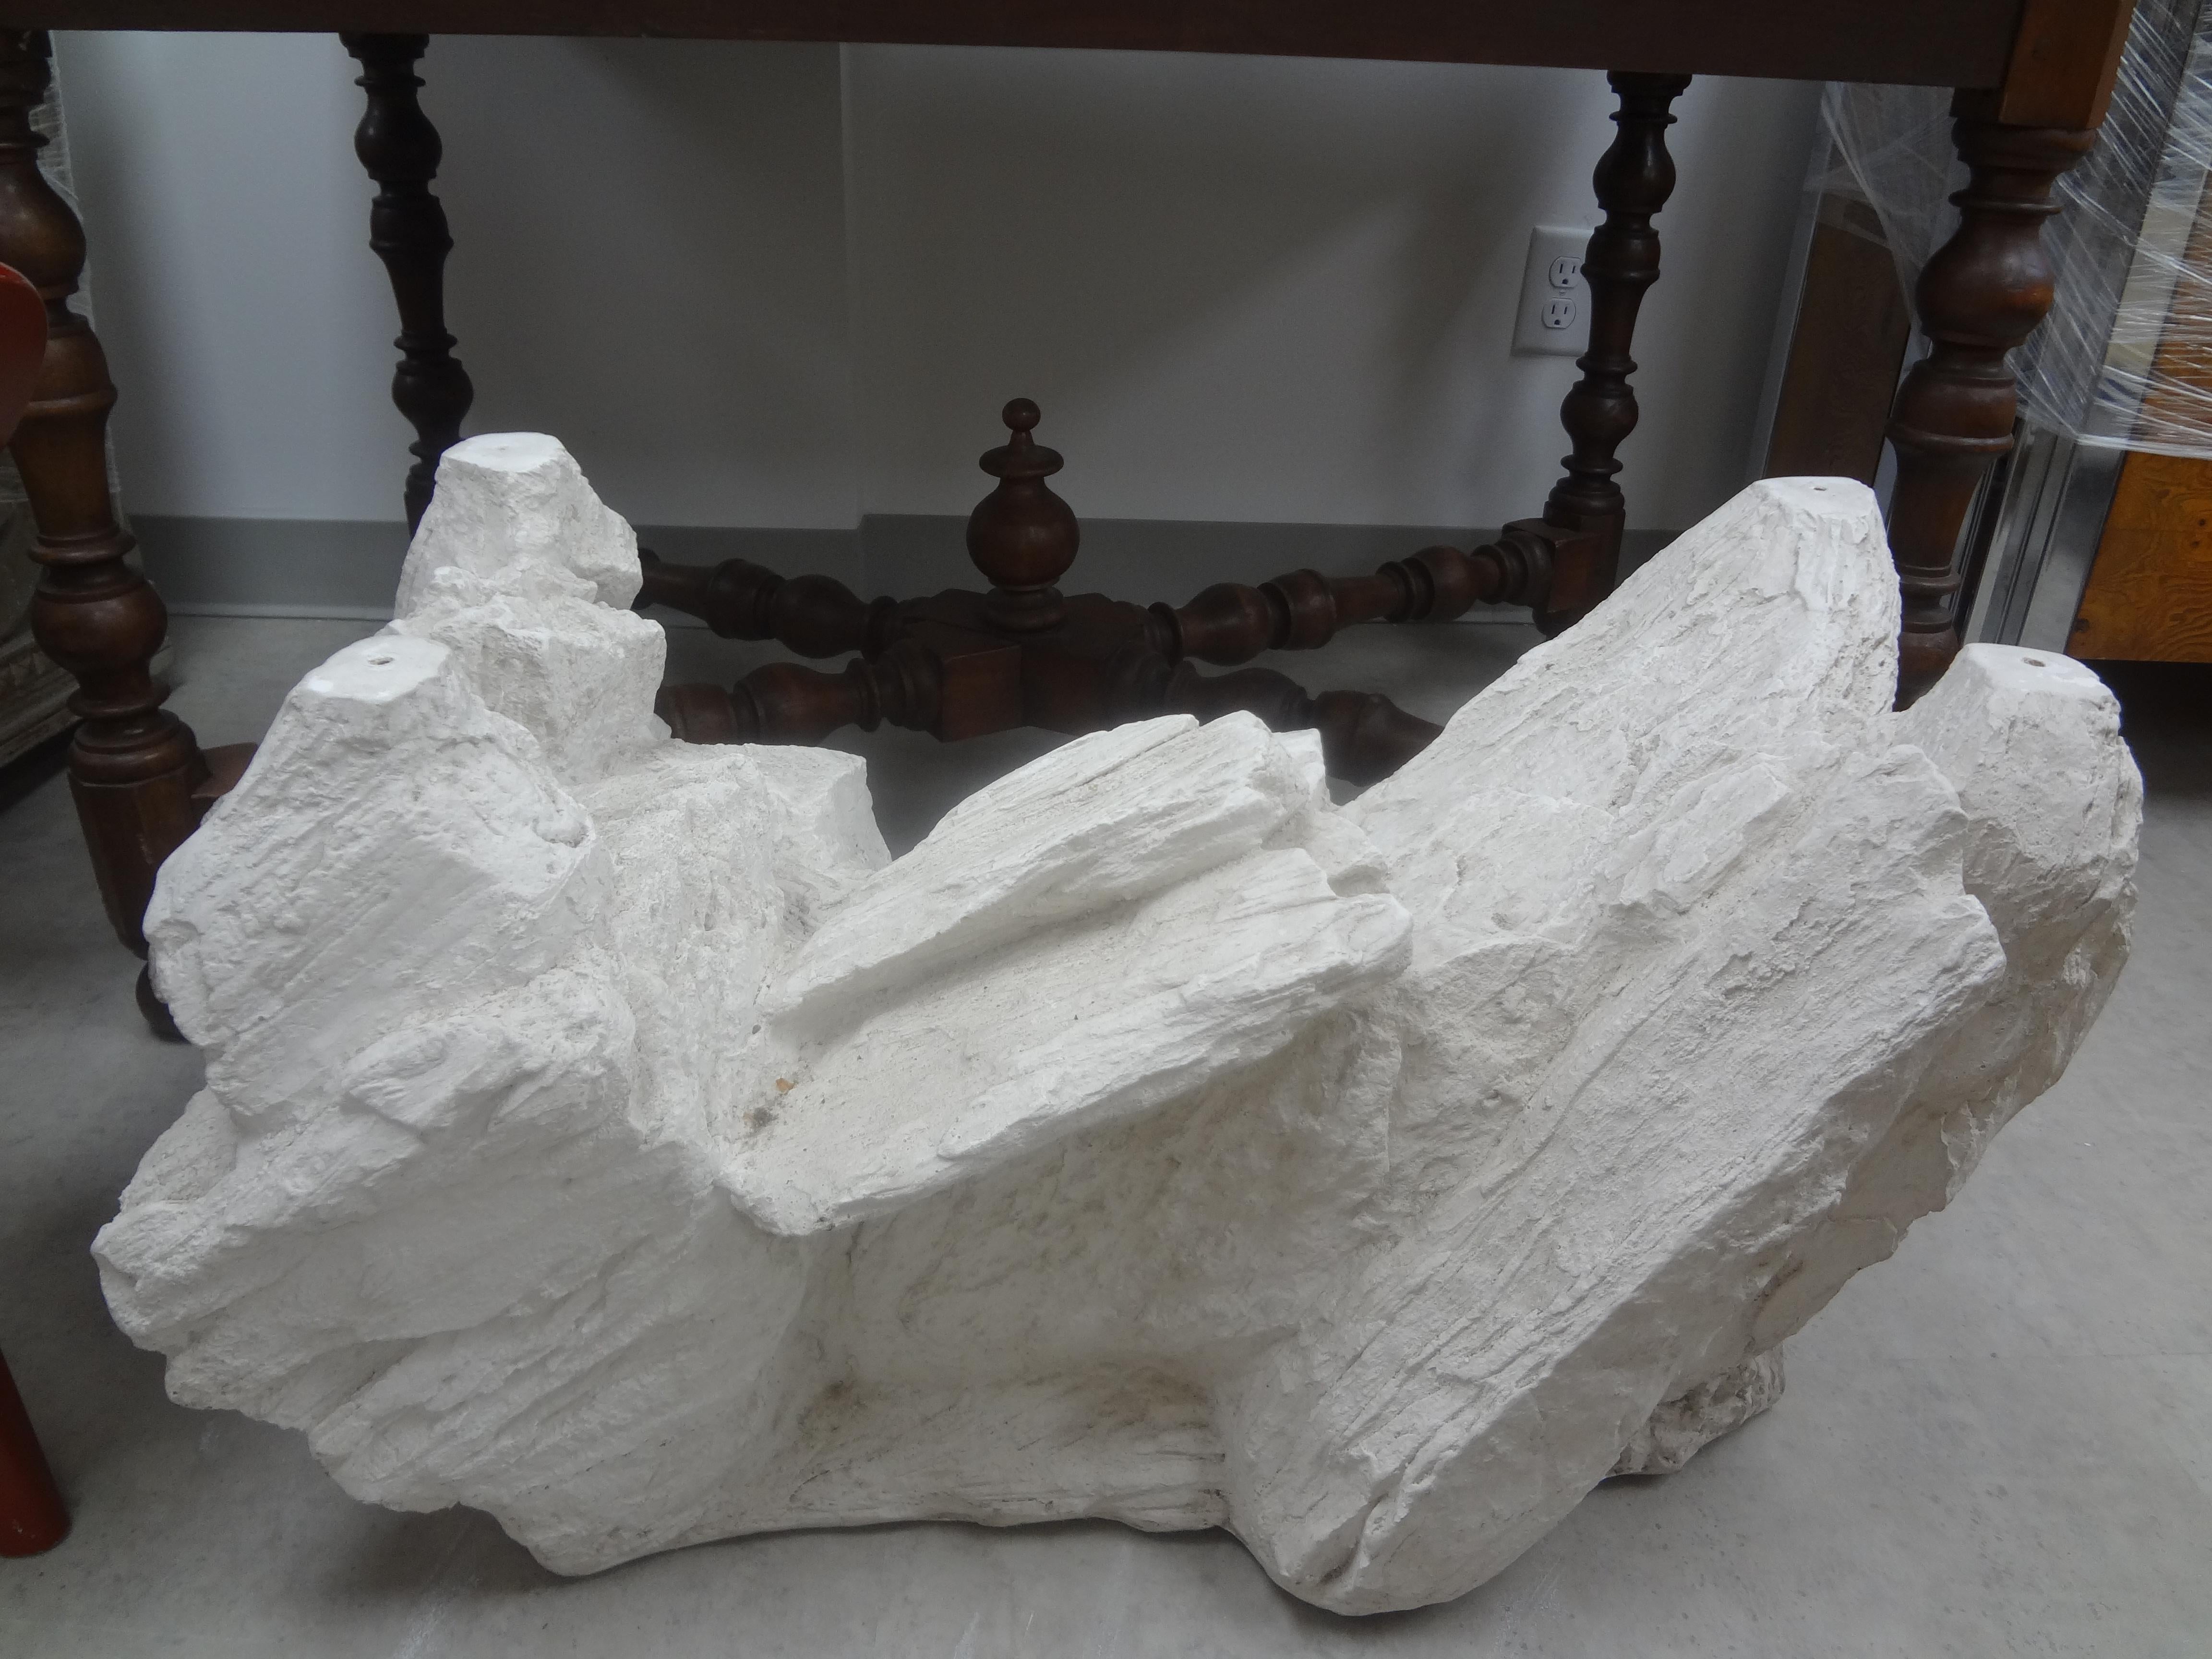 Midcentury organic modern plaster faux rock table base attributed to Sirmos.
Fantastic midcentury organic Modern plaster faux rock quarry table base. This beautiful substantial plaster faux rock formation table base is ready for your choice of a